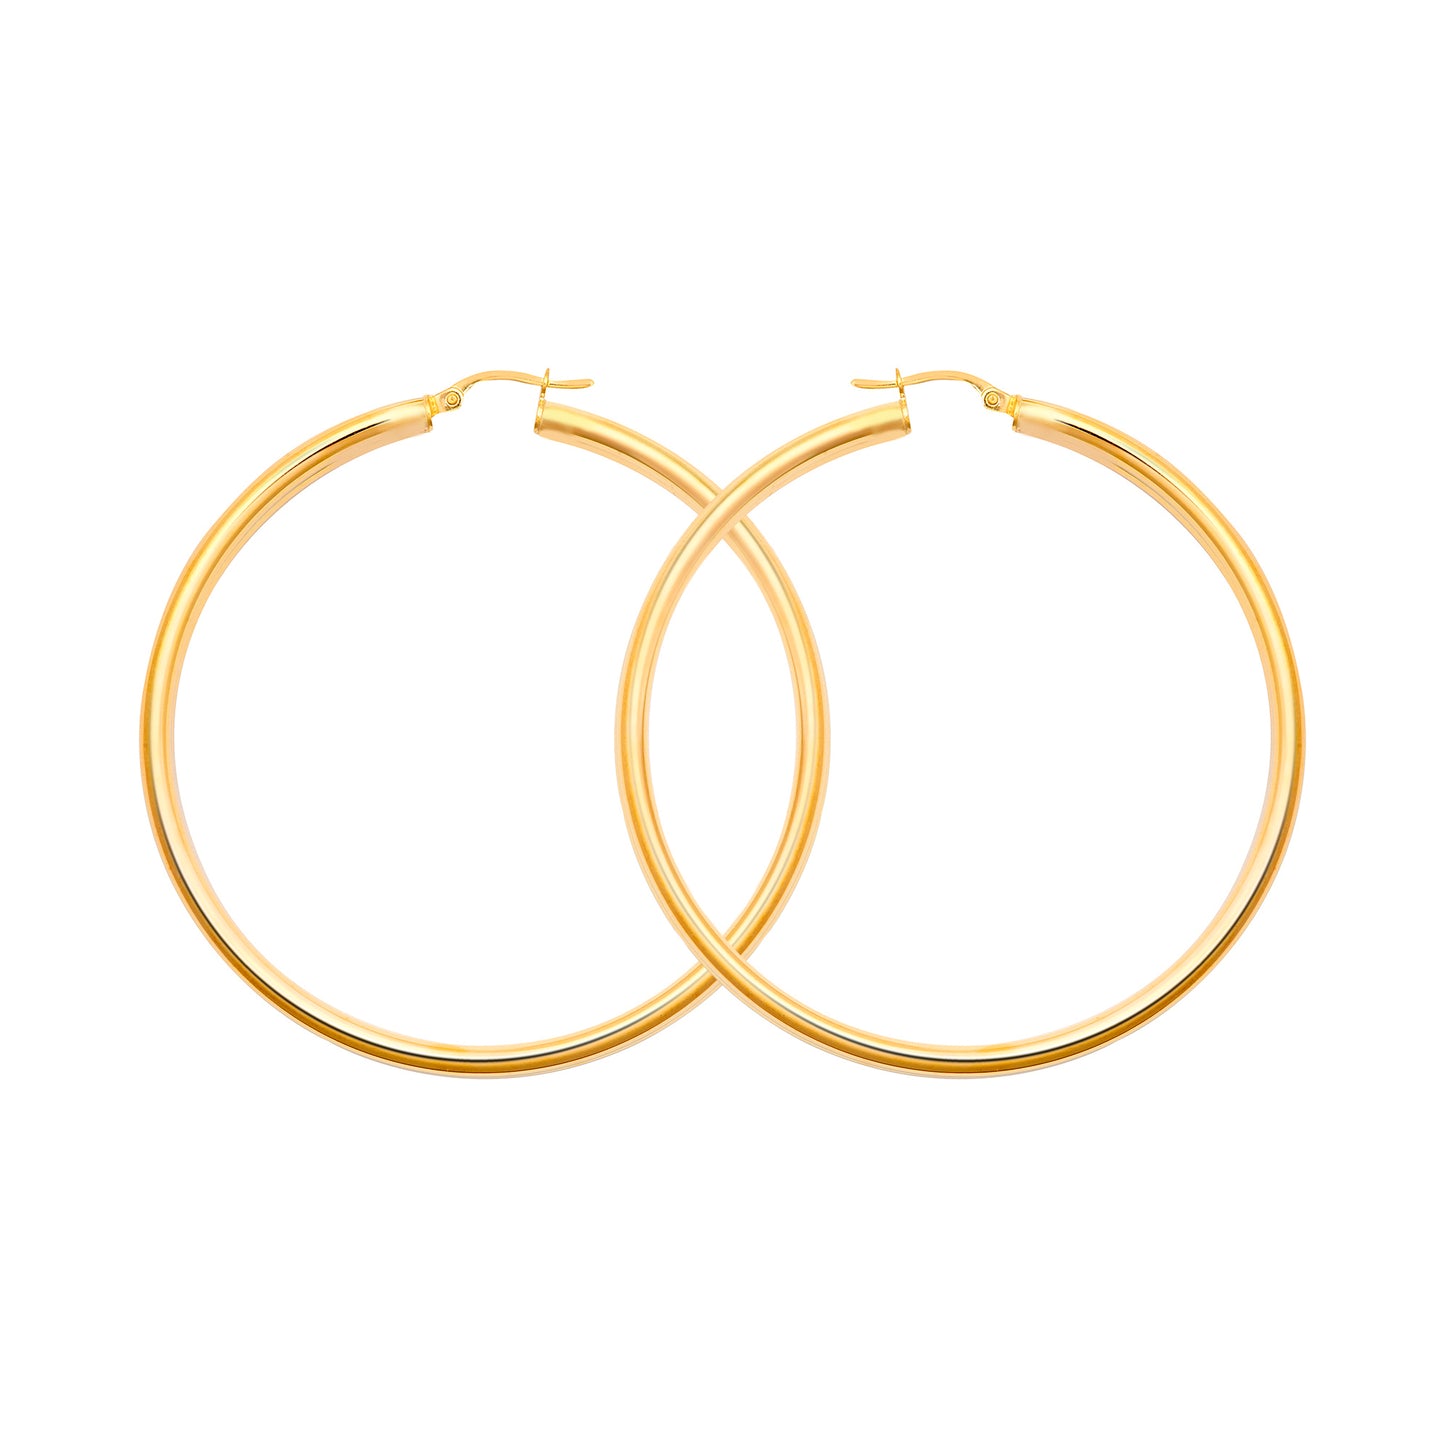 Ladies 9ct Gold  Polished 3mm Hoop Earrings 55mm - JER179E